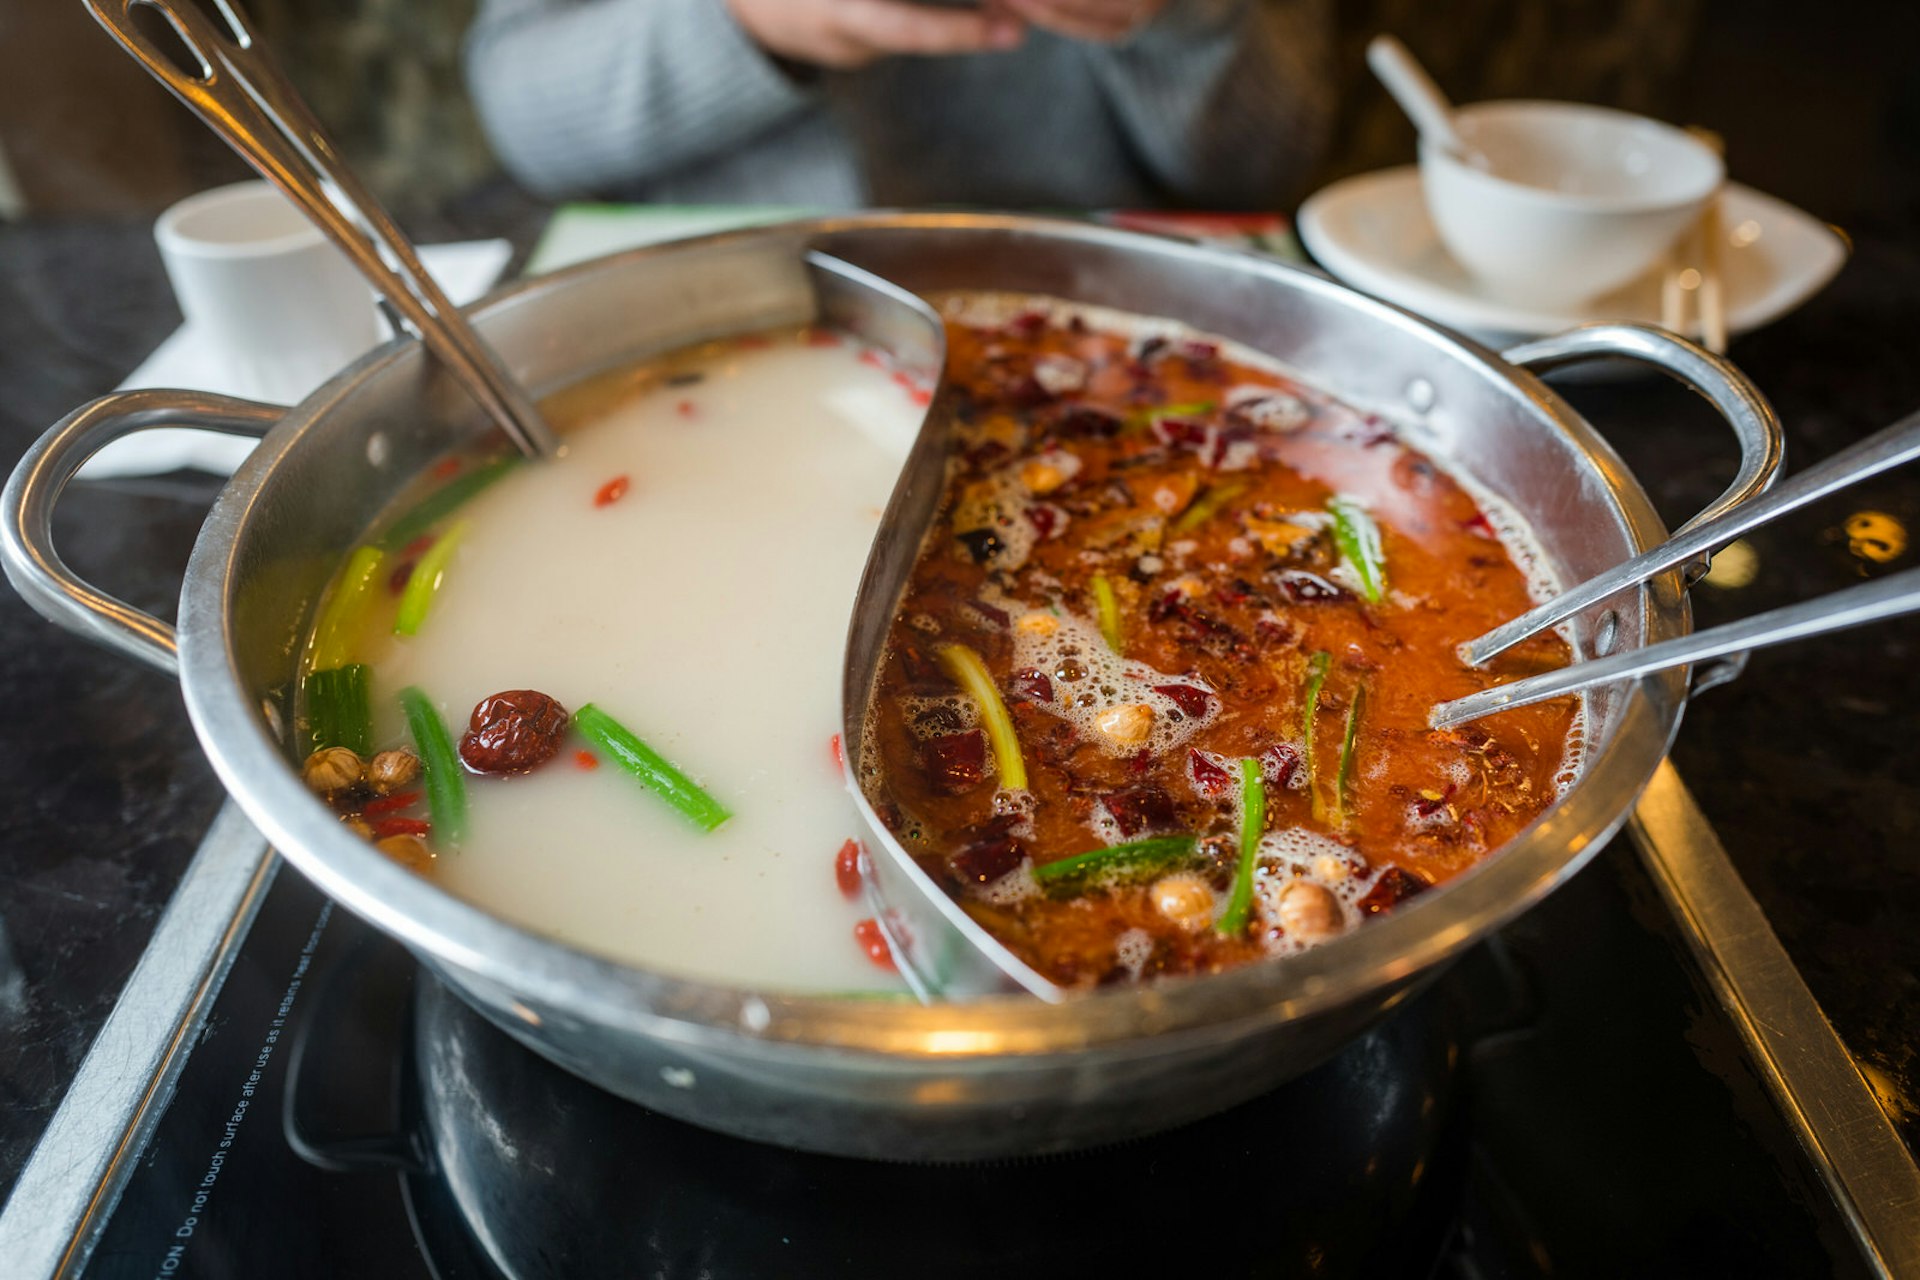 The split 'yuanyang' hotpot allows sampling of both spicy and mild broths © Yiming Chen / Getty